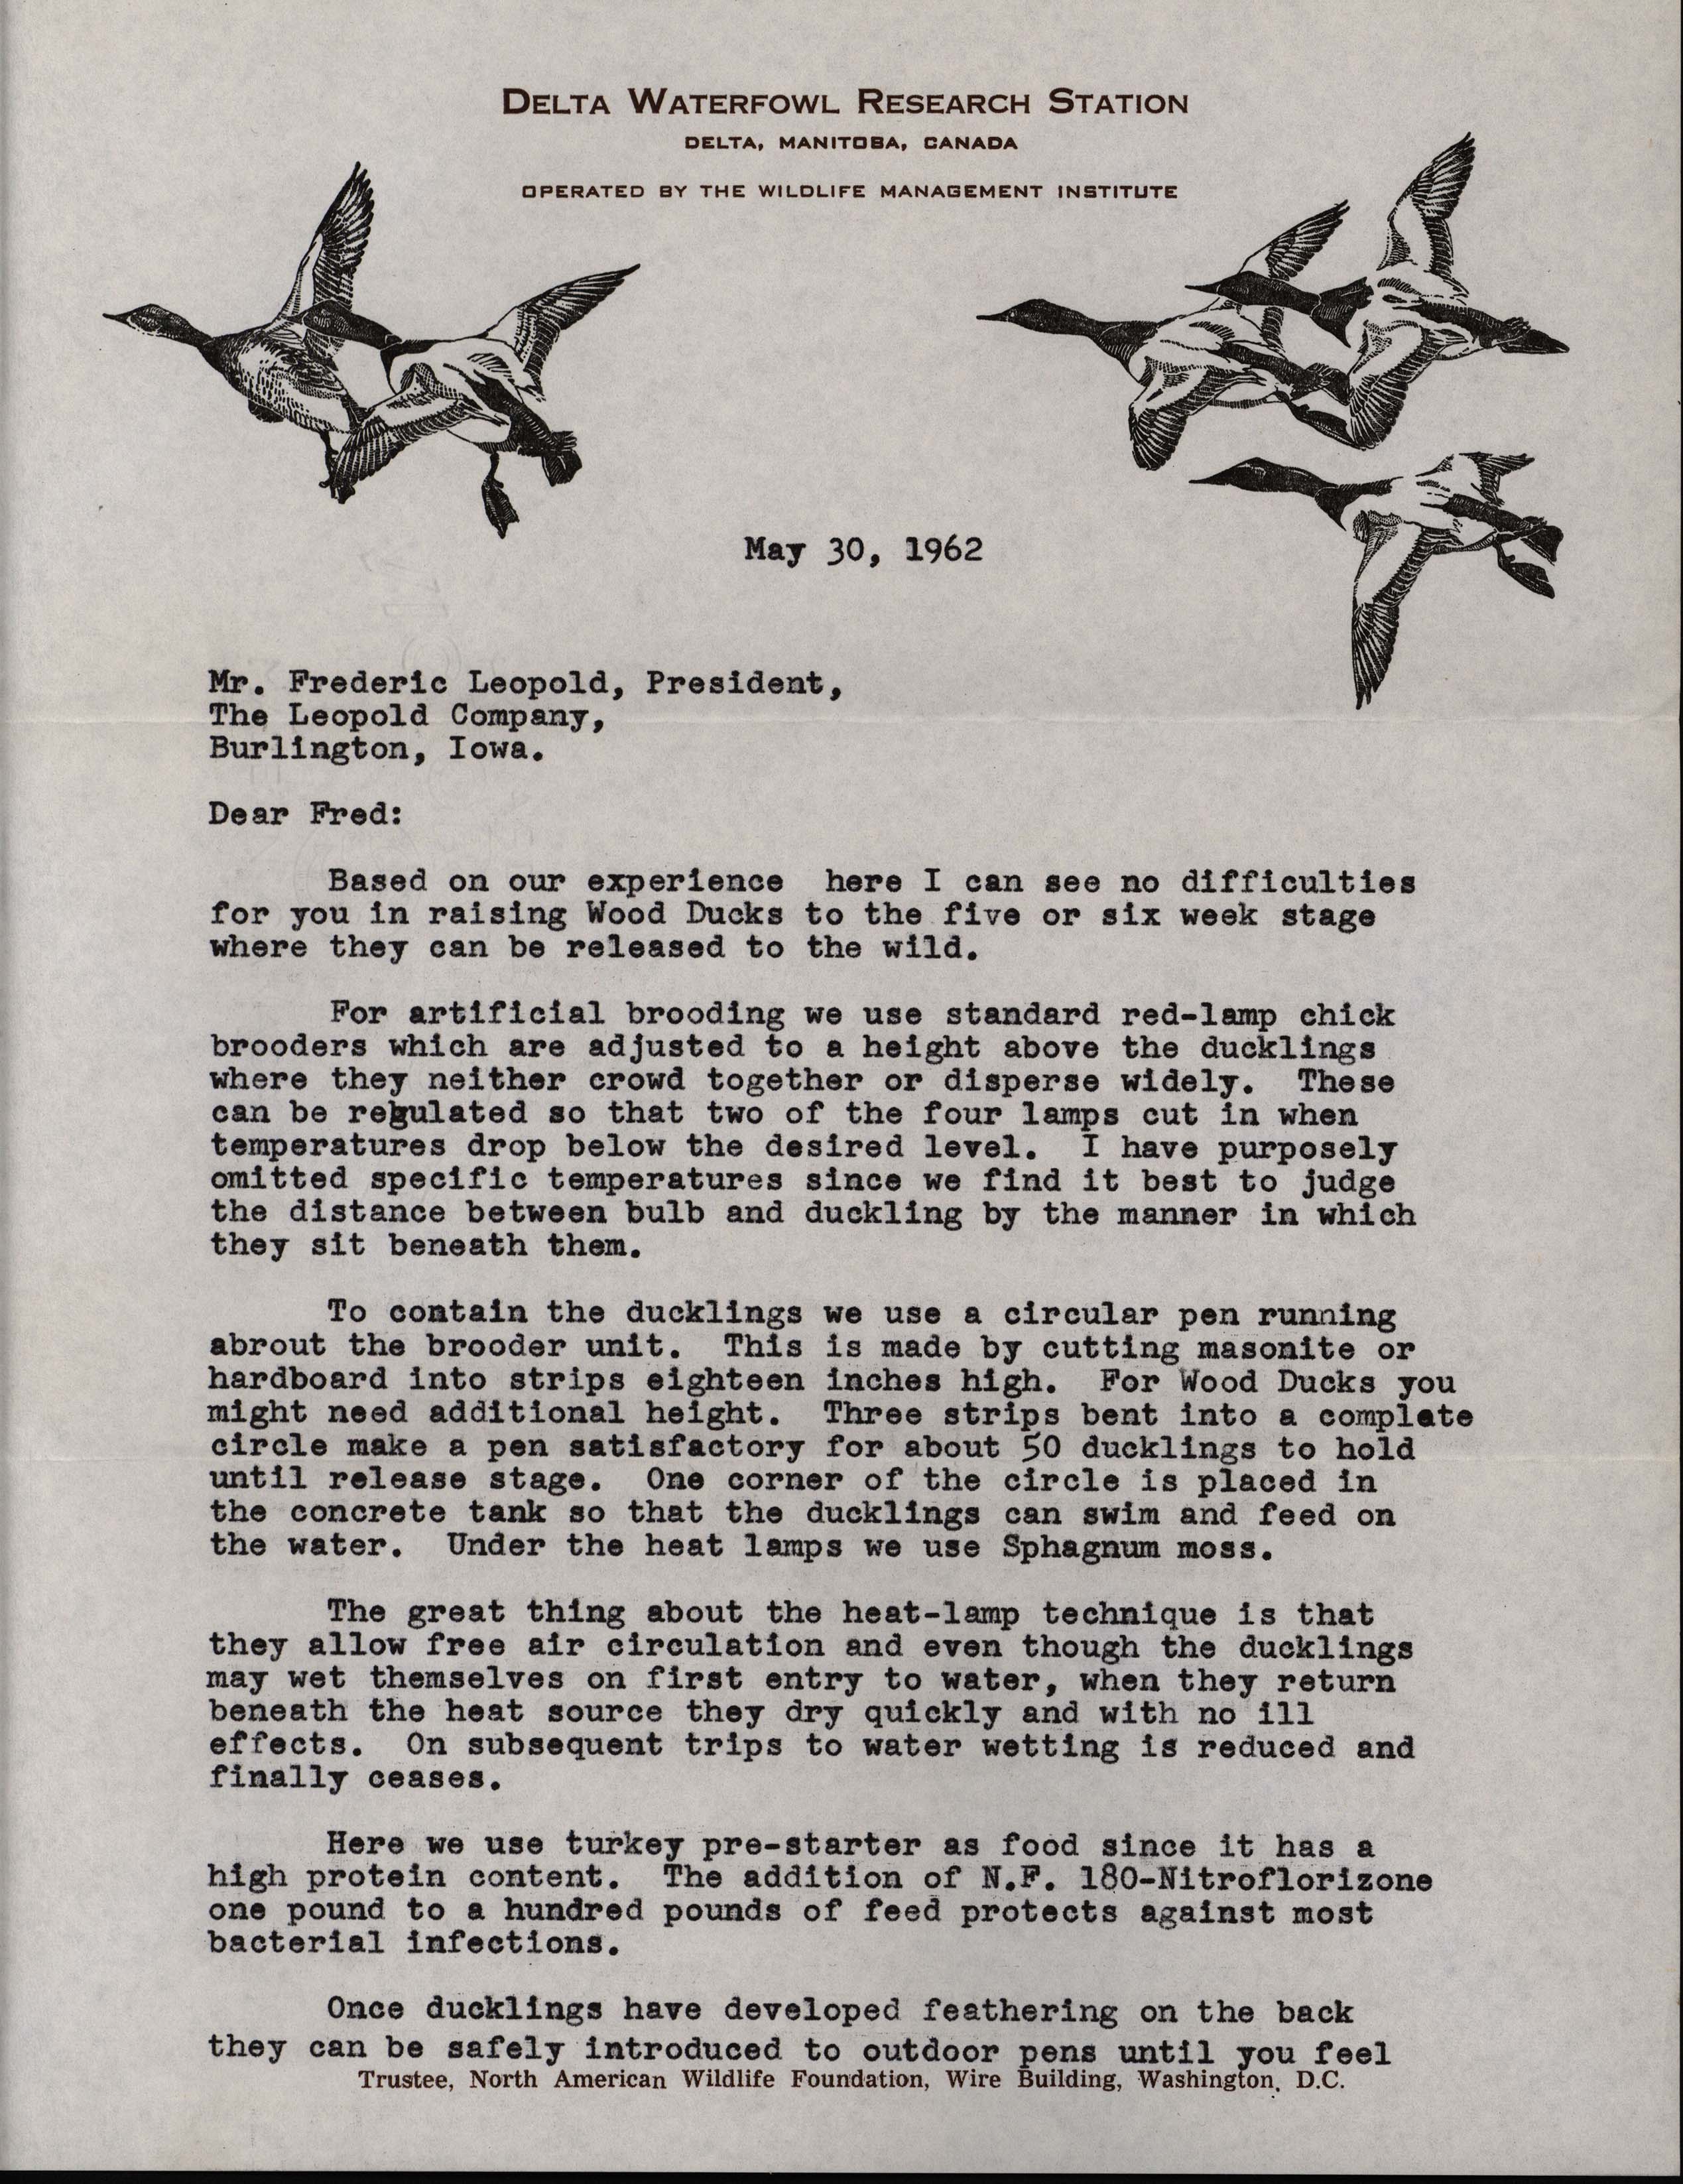 Peter Ward letter to Frederic Leopold regarding raising wood ducks, May 30, 1962